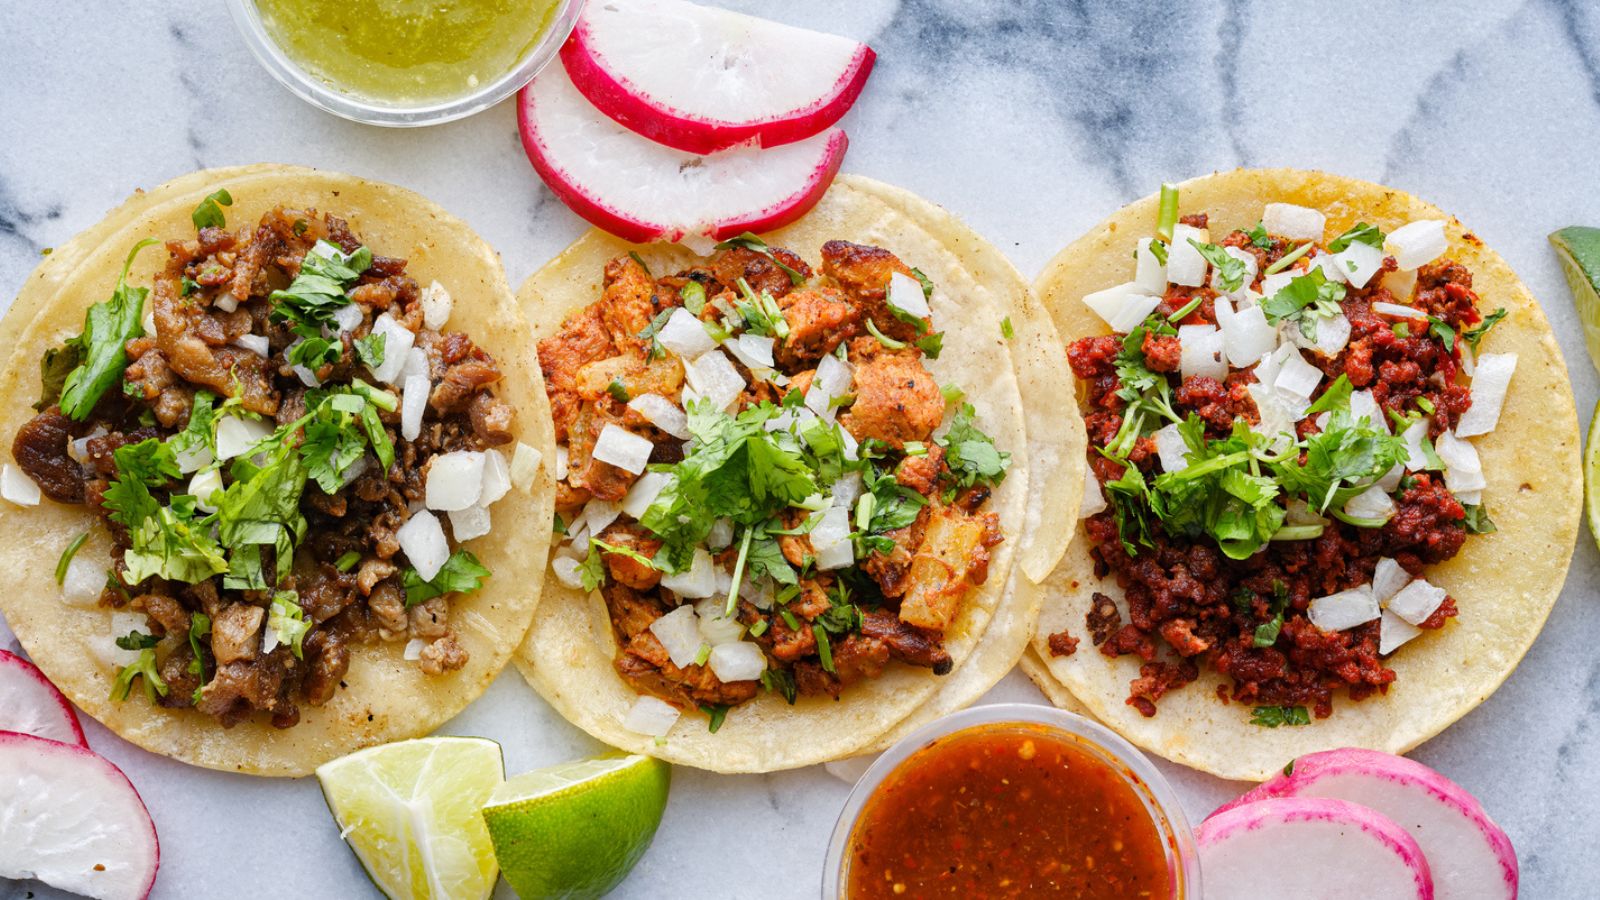 20 Tasty Taco Recipes to Spark Your Culinary Imagination from 